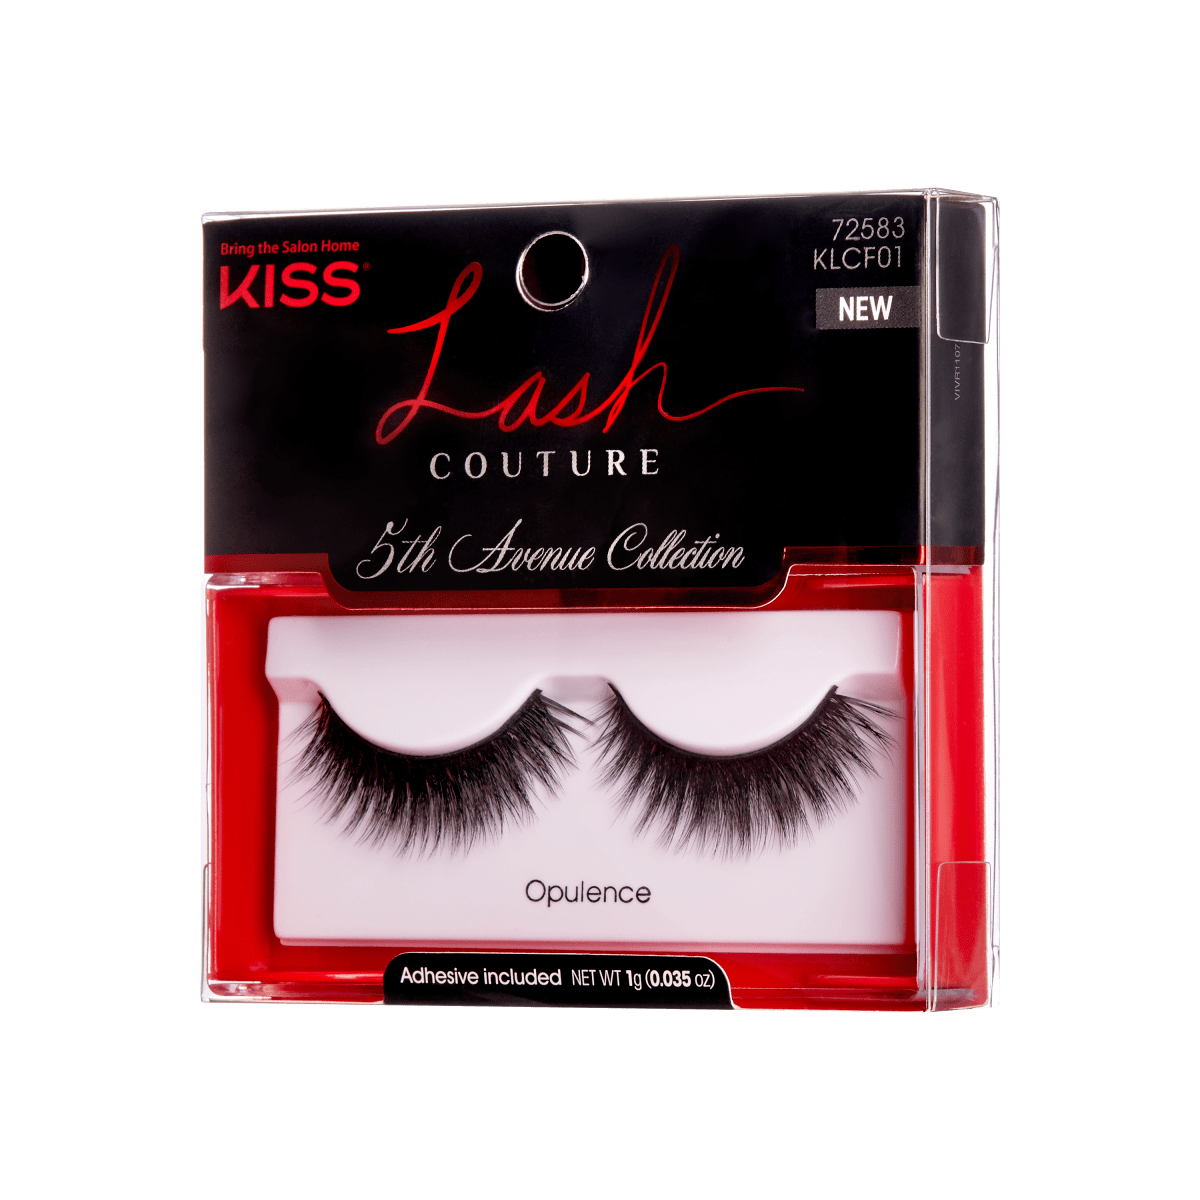 KISS Lash Couture 5th Ave Opulence